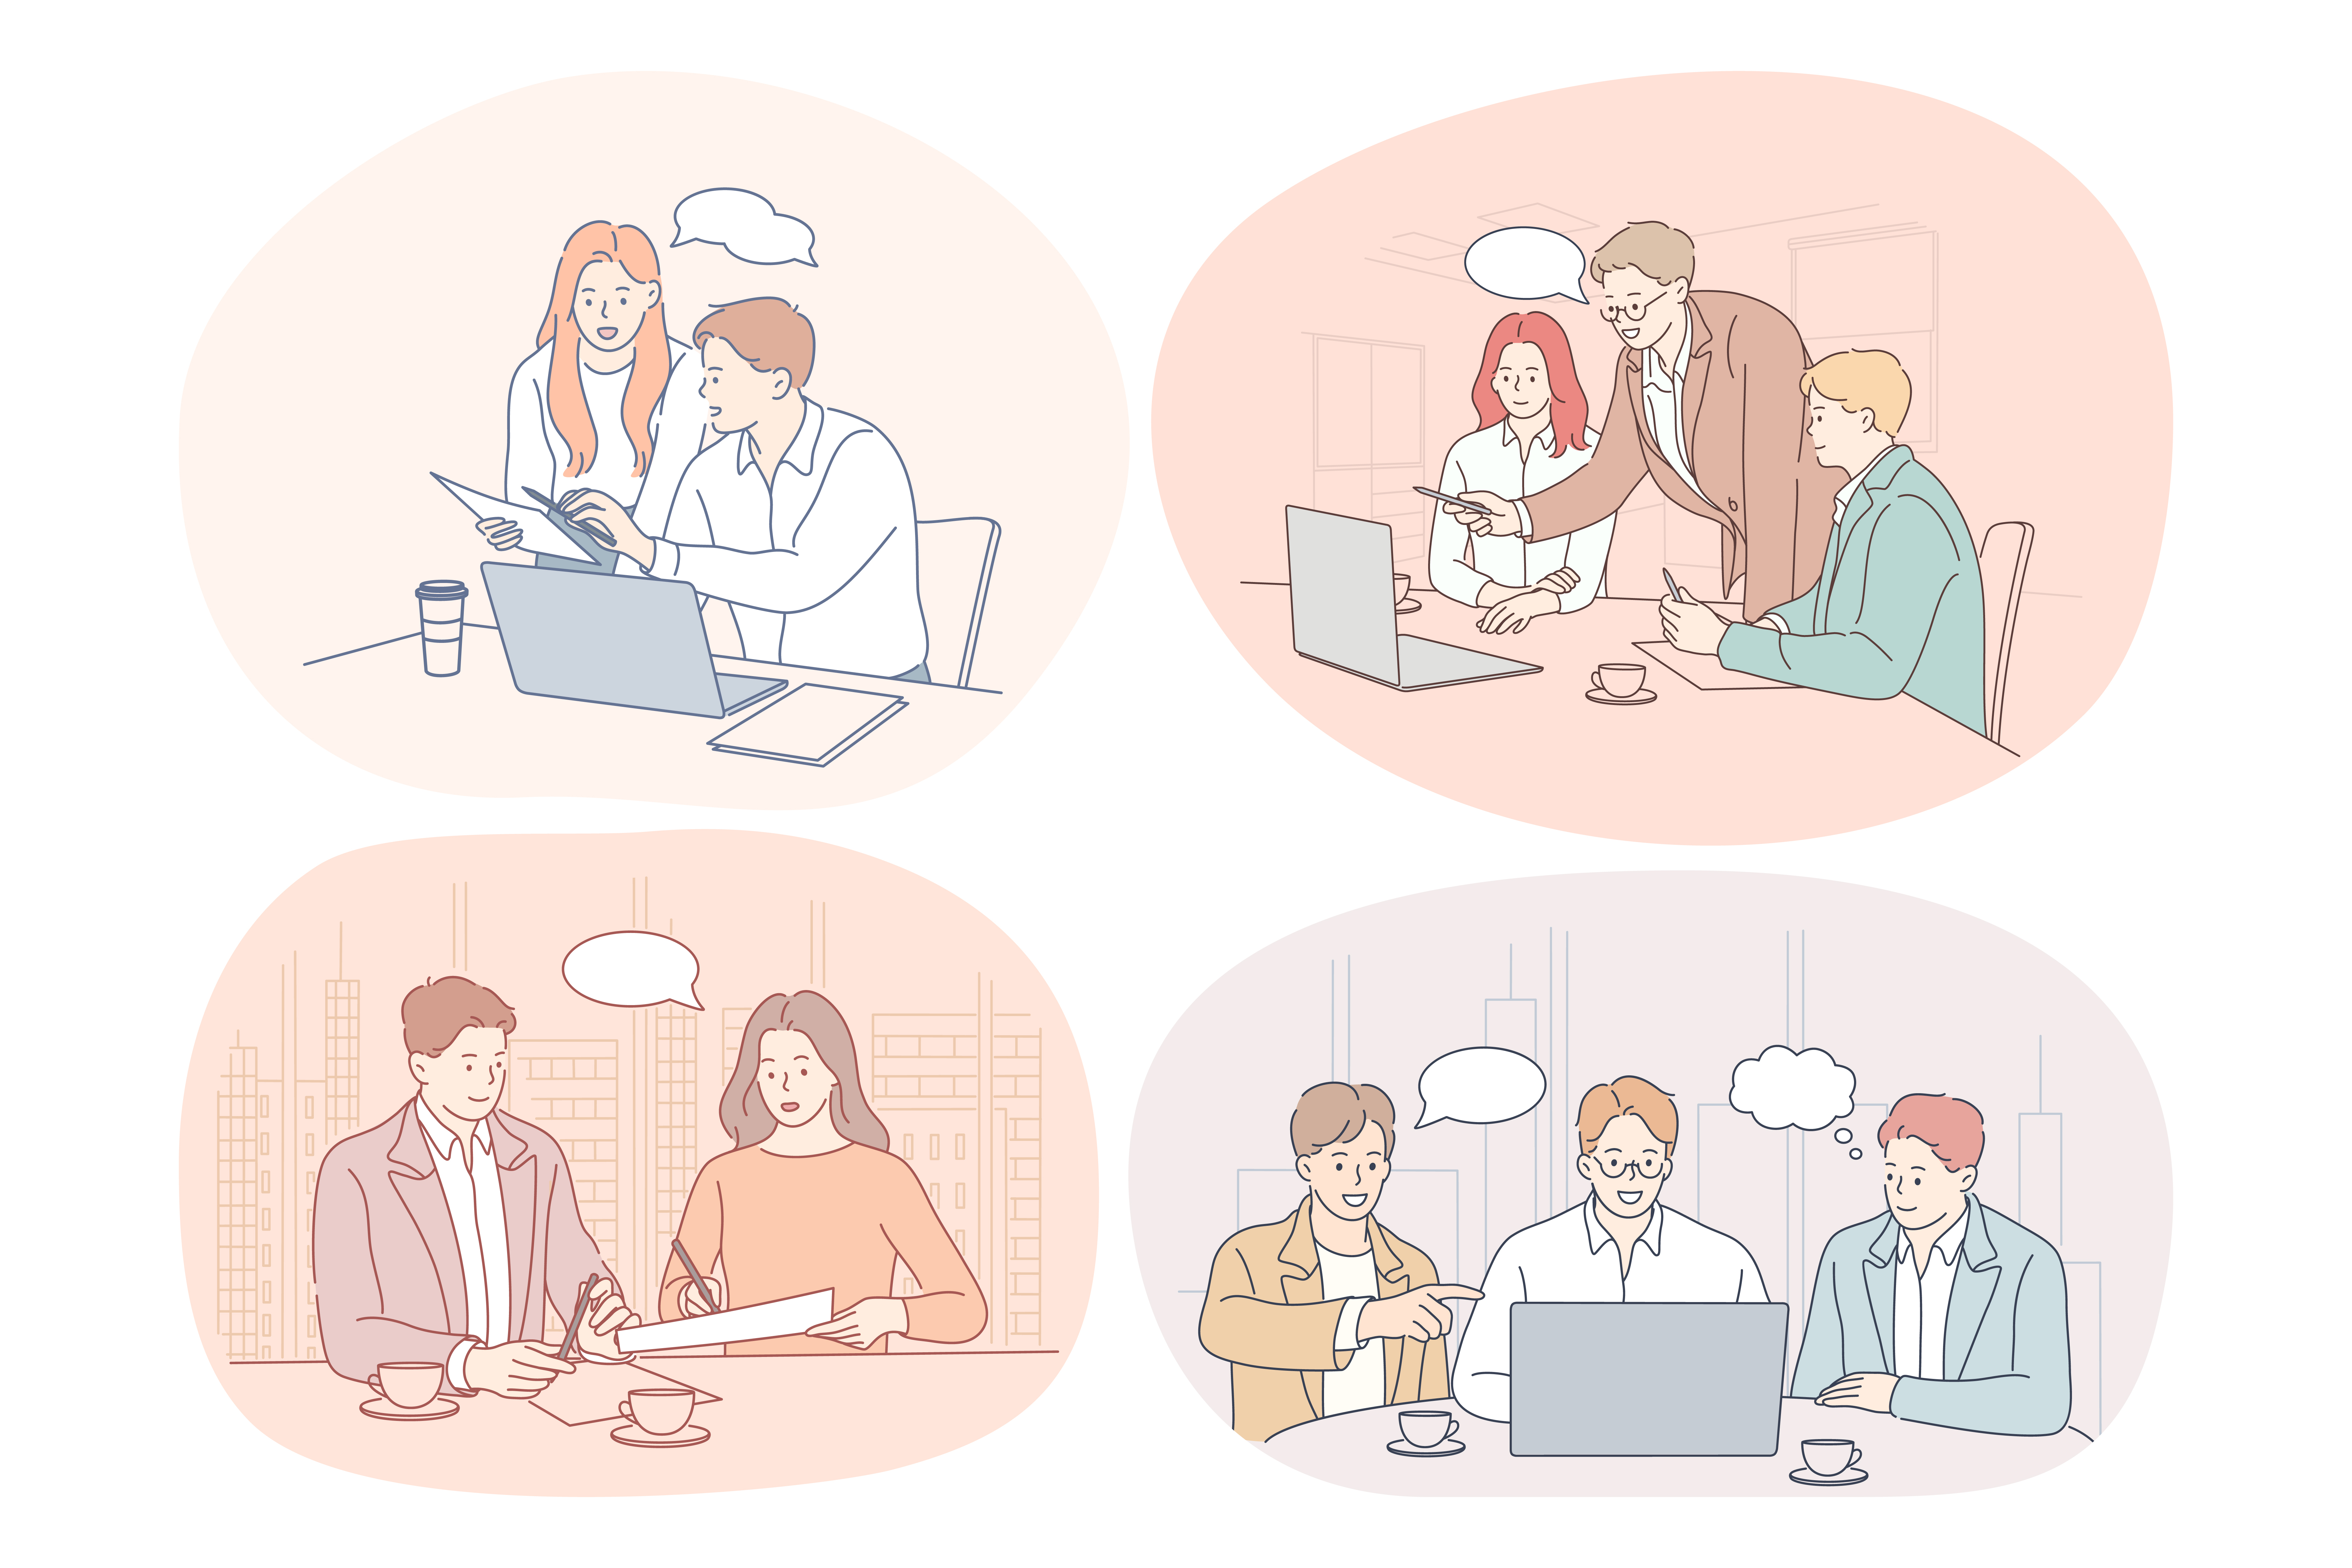 Teamwork, brainstorming, discussion, business, startup, negotiations concept. Business people partners coworkers cartoon characters discussing projects and startups together in office with laptops . Teamwork, brainstorming, business, negotiations, deal, office, collaboration concept